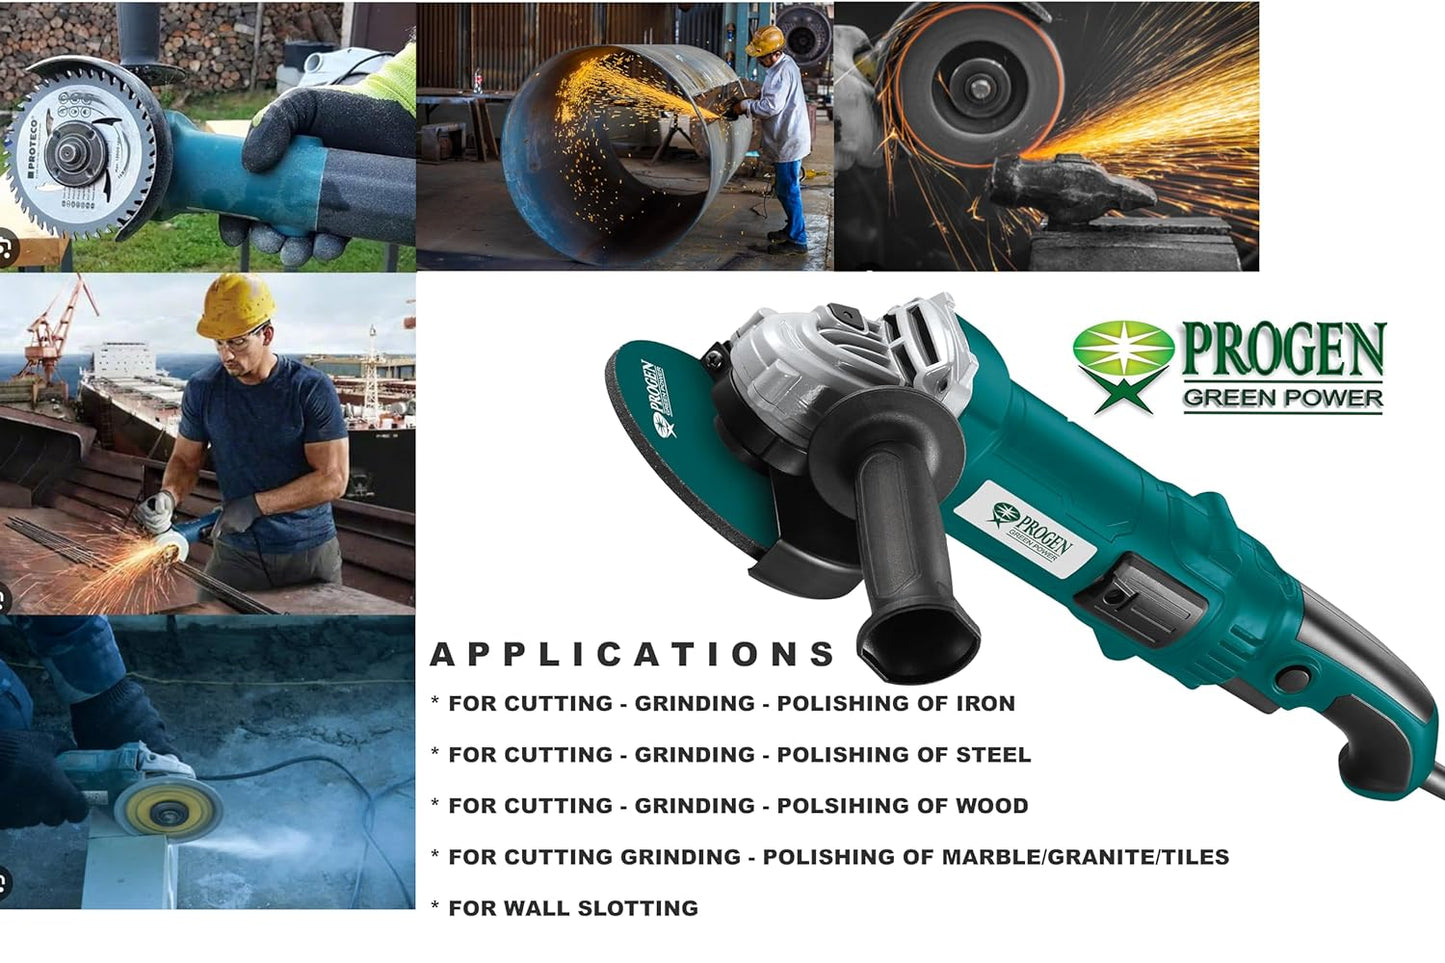 PROGEN 9105-HG, 5-inch, 1600W Heavy Duty Angle Grinder Machine for Grinding, Cutting, Sharpening, Polishing